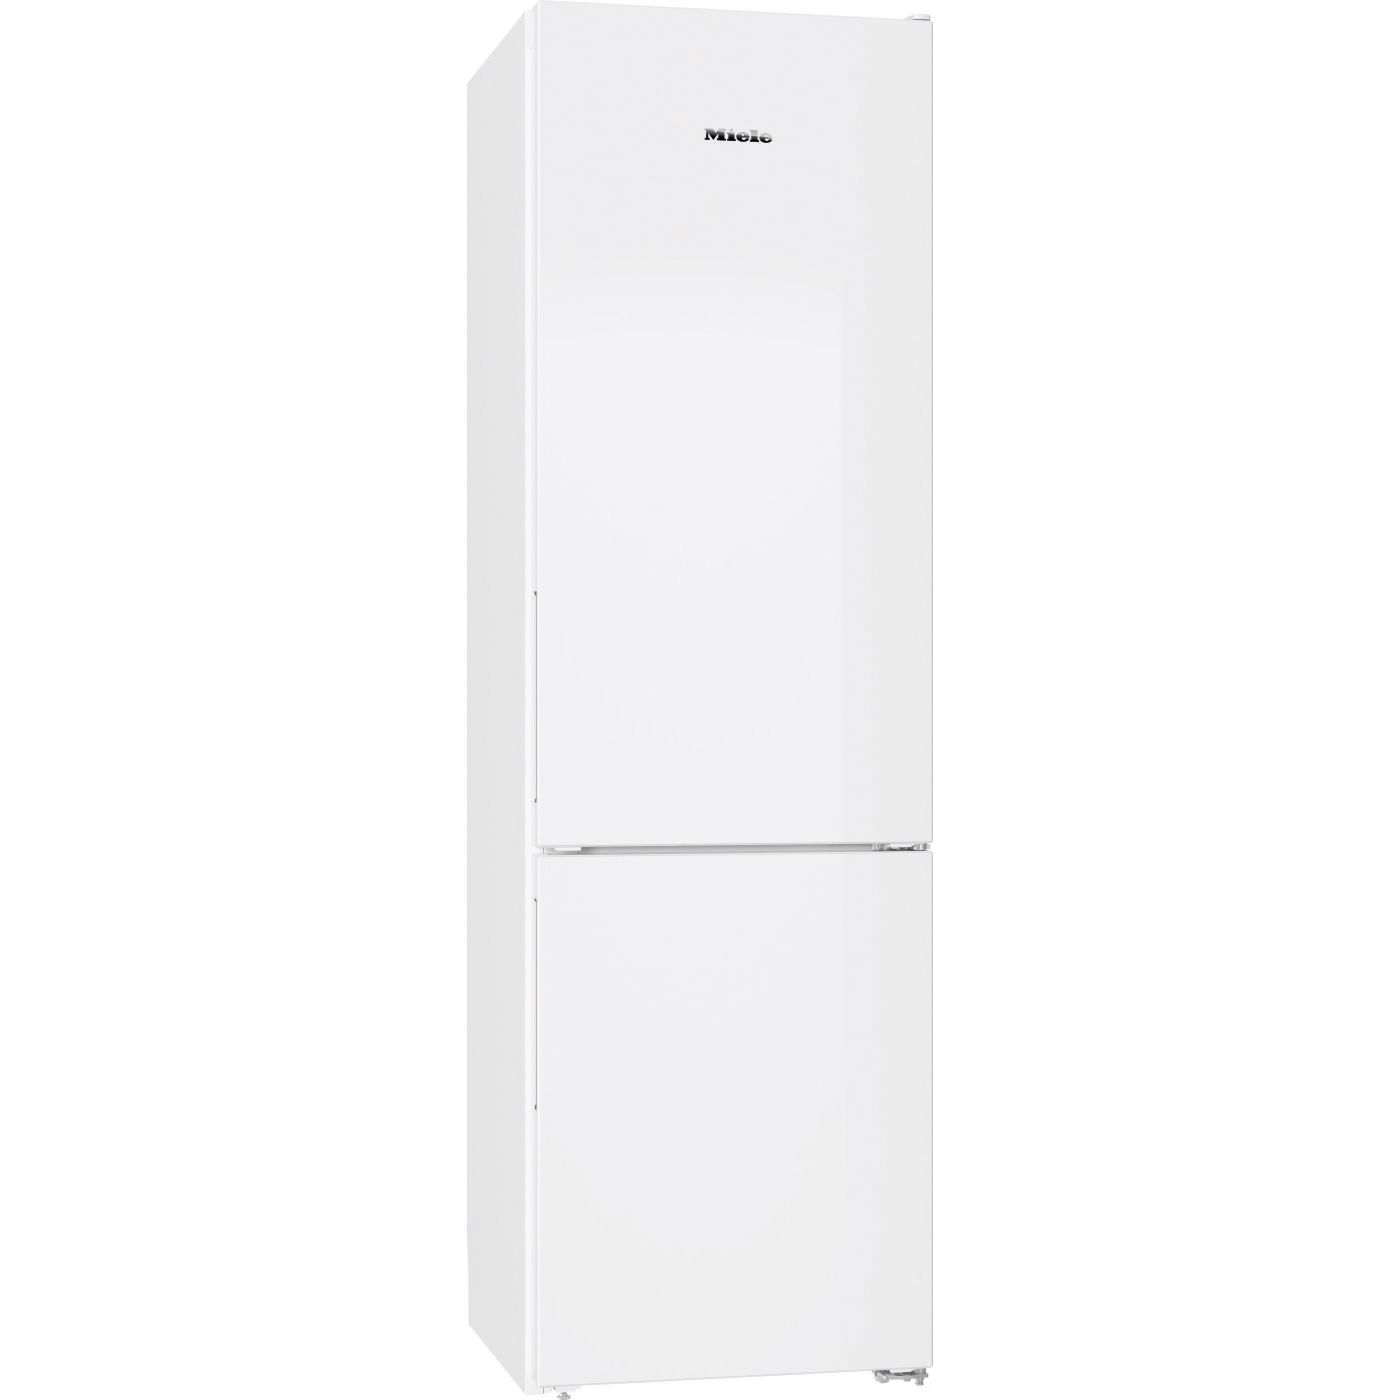 Miele KFN 29032 D WS Fridge Freezer, A++ Energy Rating, 60cm Wide in White